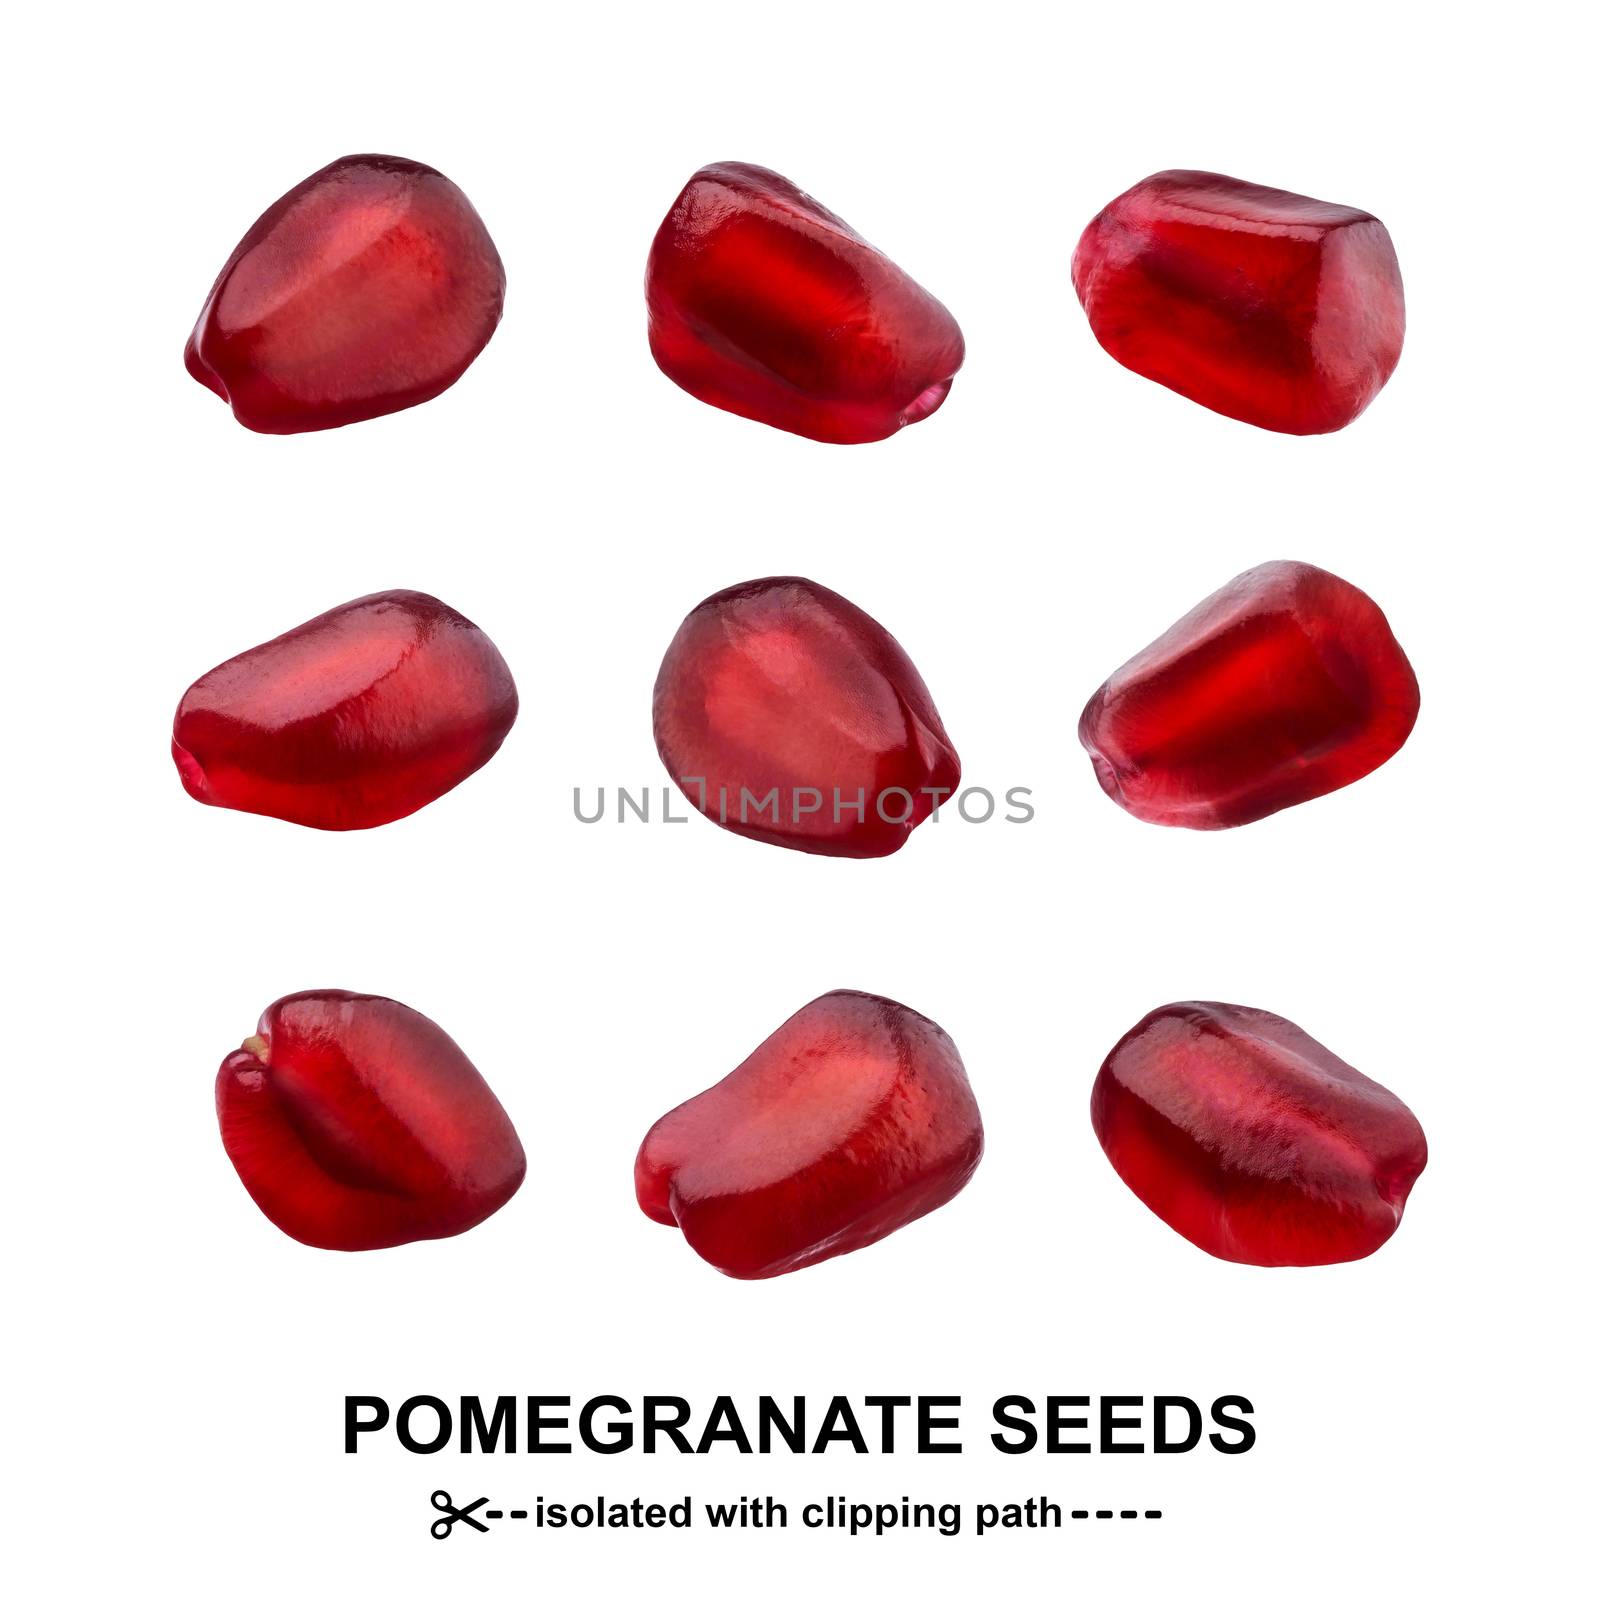 One Pomegranate seed isolated on white background with clipping path, close-up, single